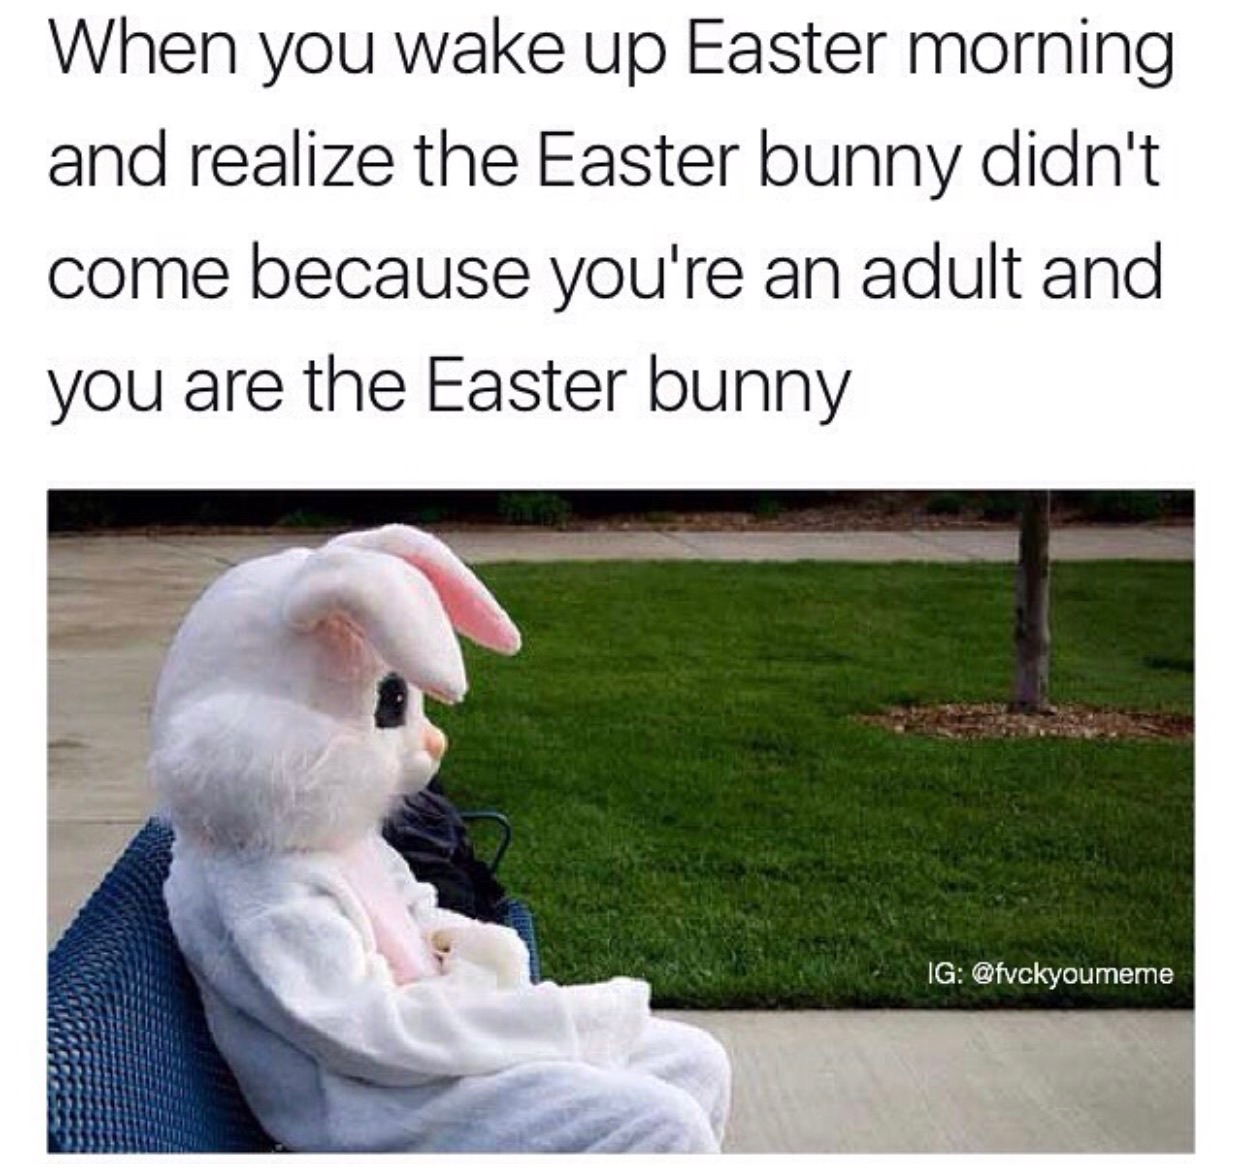 easter bunny on drugs - When you wake up Easter morning and realize the Easter bunny didn't come because you're an adult and you are the Easter bunny Ig